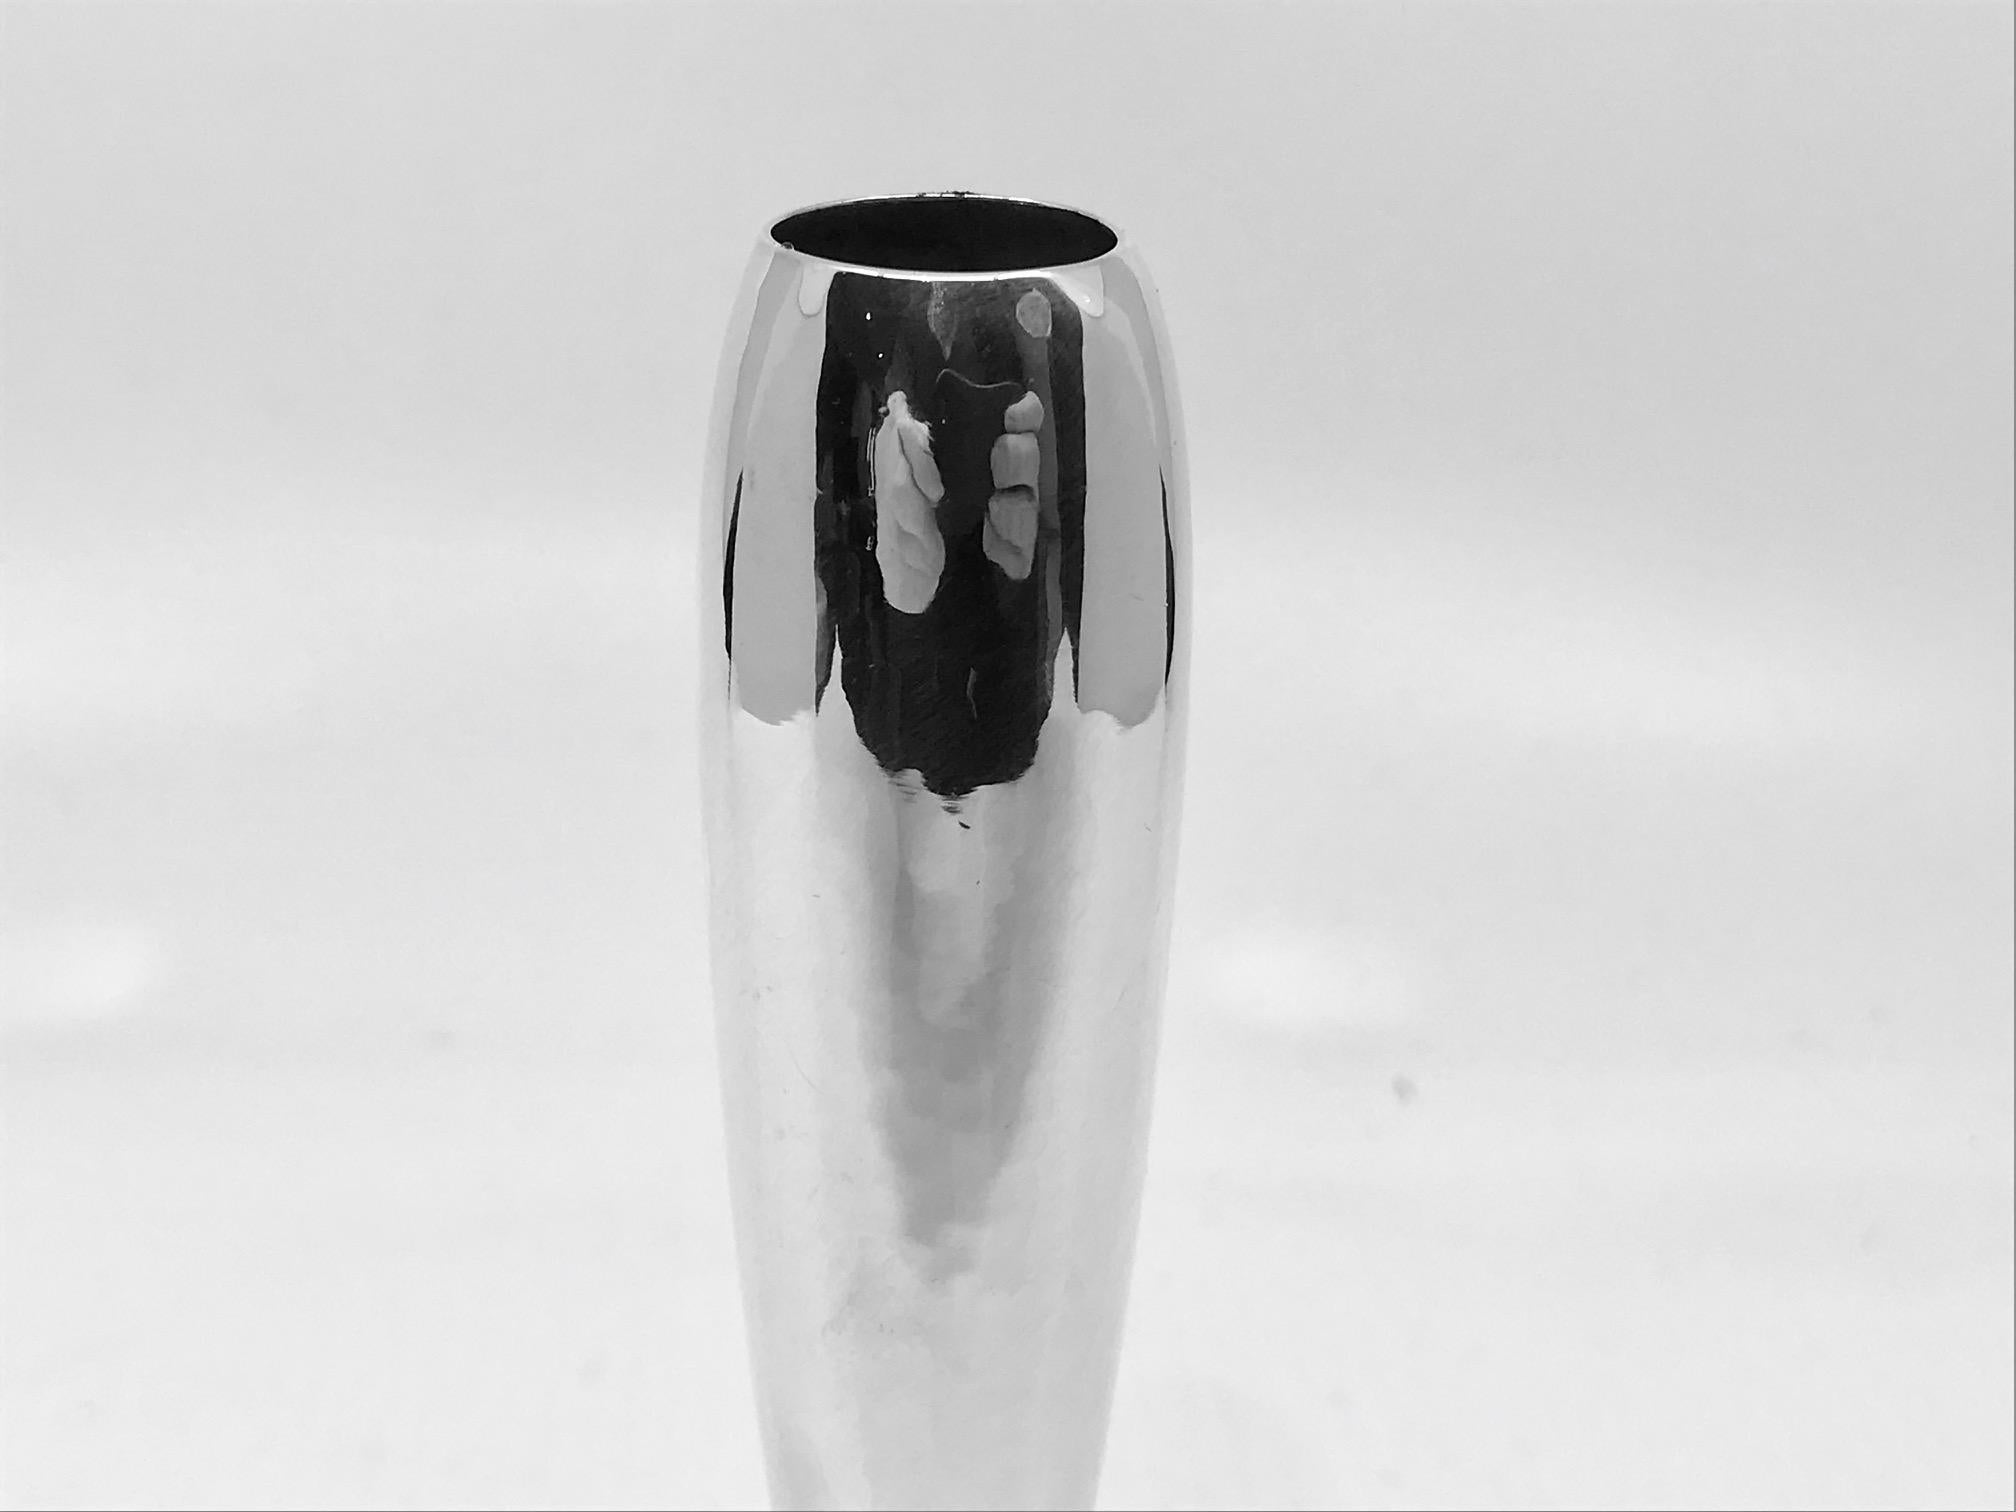 Vintage sterling silver Georg Jensen orchid vase, design #500 by Harald Nielsen from the 1920s.

Measures 5 3/4? in height and 1 7/8? diameter at base (14.3cm, 4.7cm).

Georg Jensen hallmark and date code R10 for 1991.